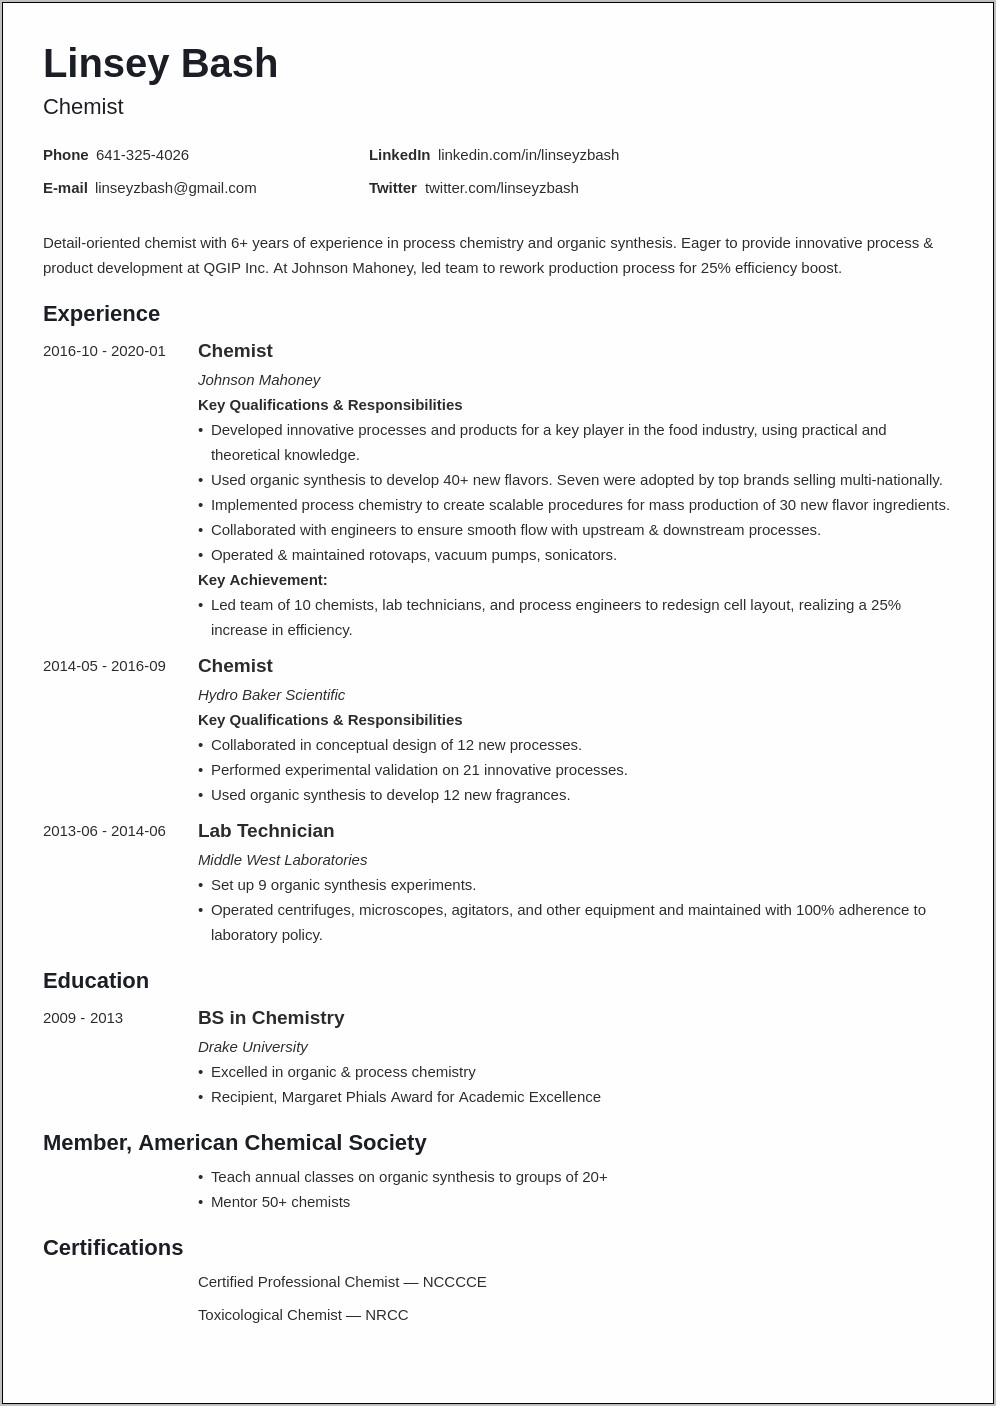 Resume Description For Organic Chemistry Research Assistant